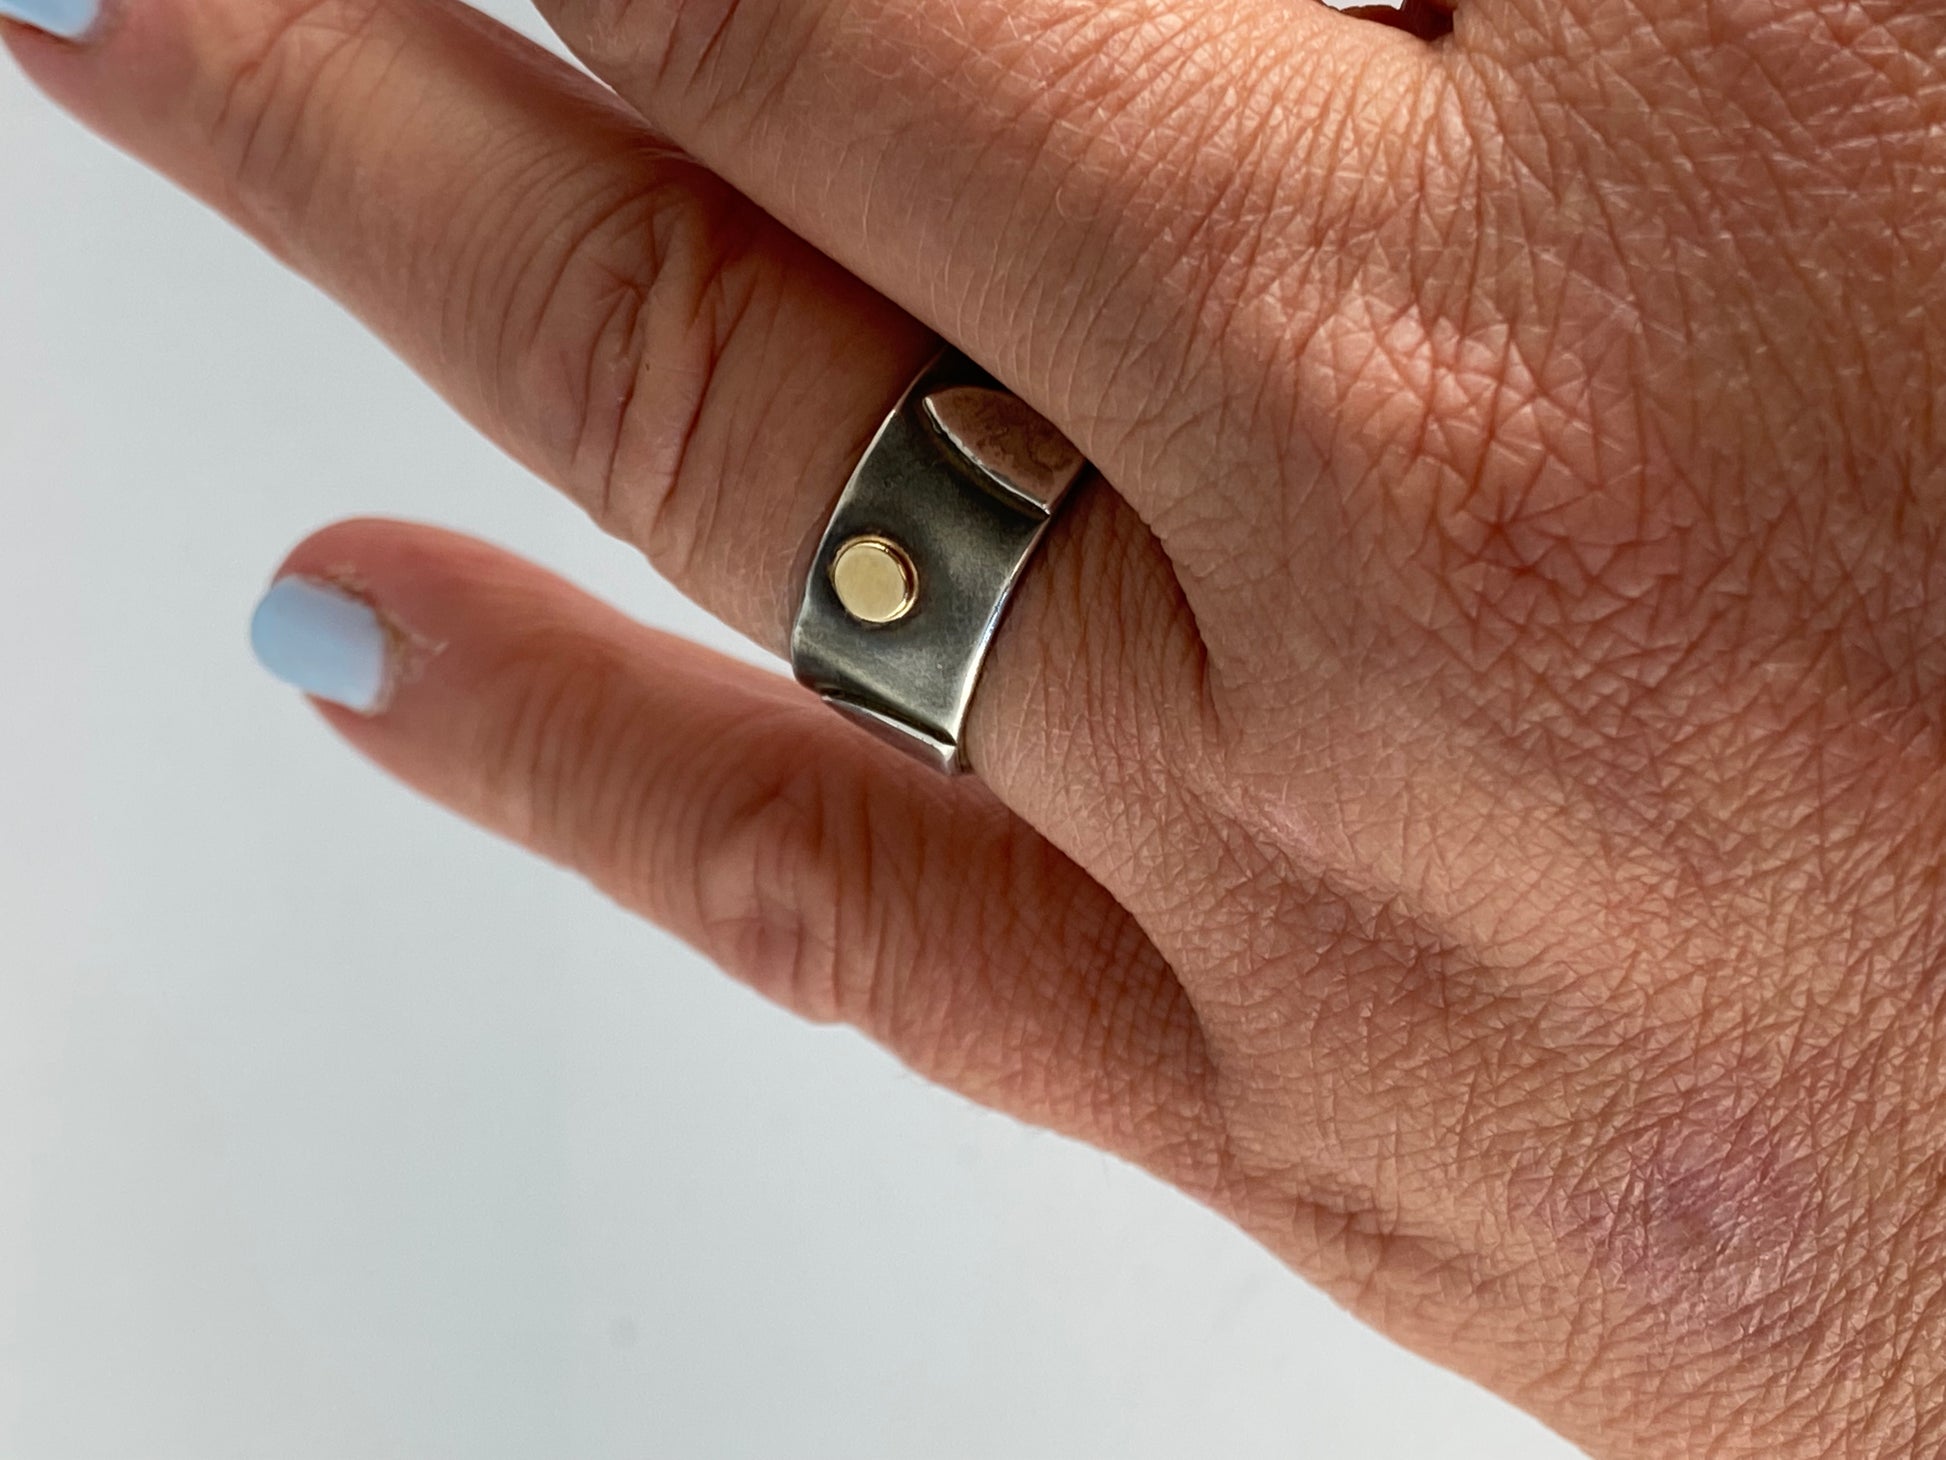 This one-of-a-kind sterling silver band is adorned with arched forms in a pattern around the sides of the ring and one central 14k gold disk. Background is patinas to dark gray; raised forms are high polish. Ring size 9. 1/3' tall. Style: rustic, boho, funky, organic, earthy yet elegant